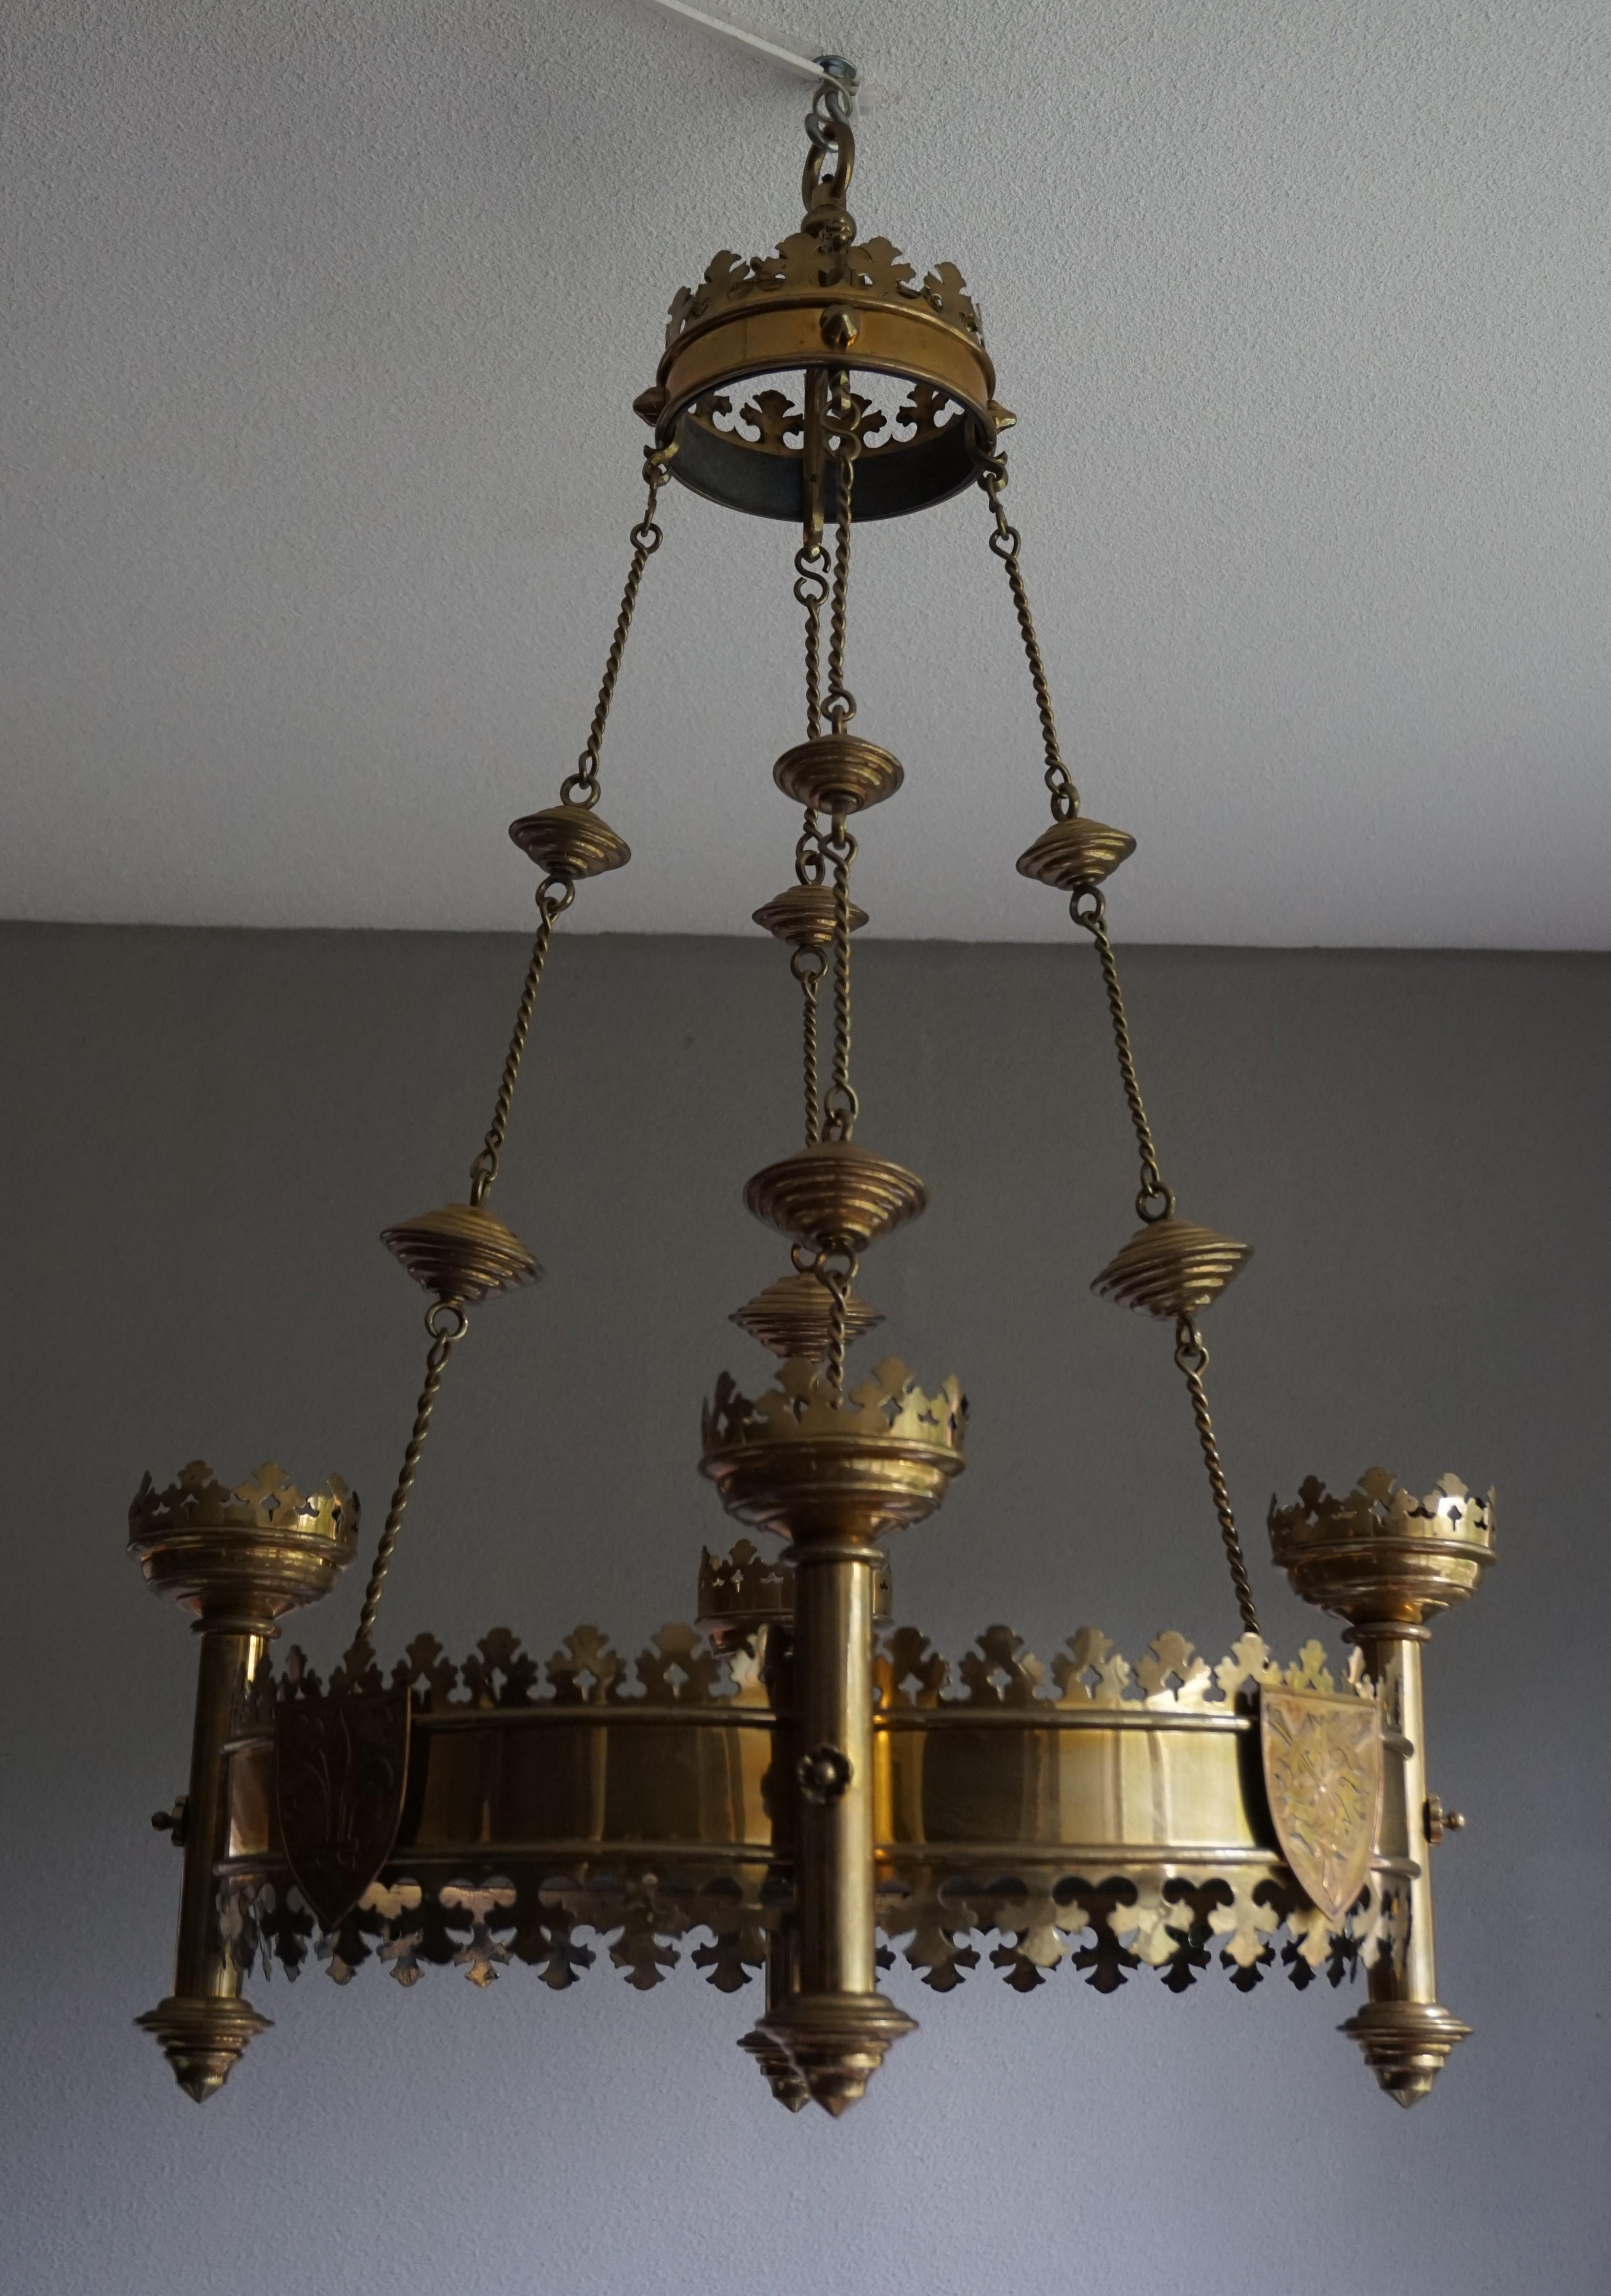 Rare and Striking Bronze & Brass Gothic Revival Advent Wreath Candle Chandelier 5